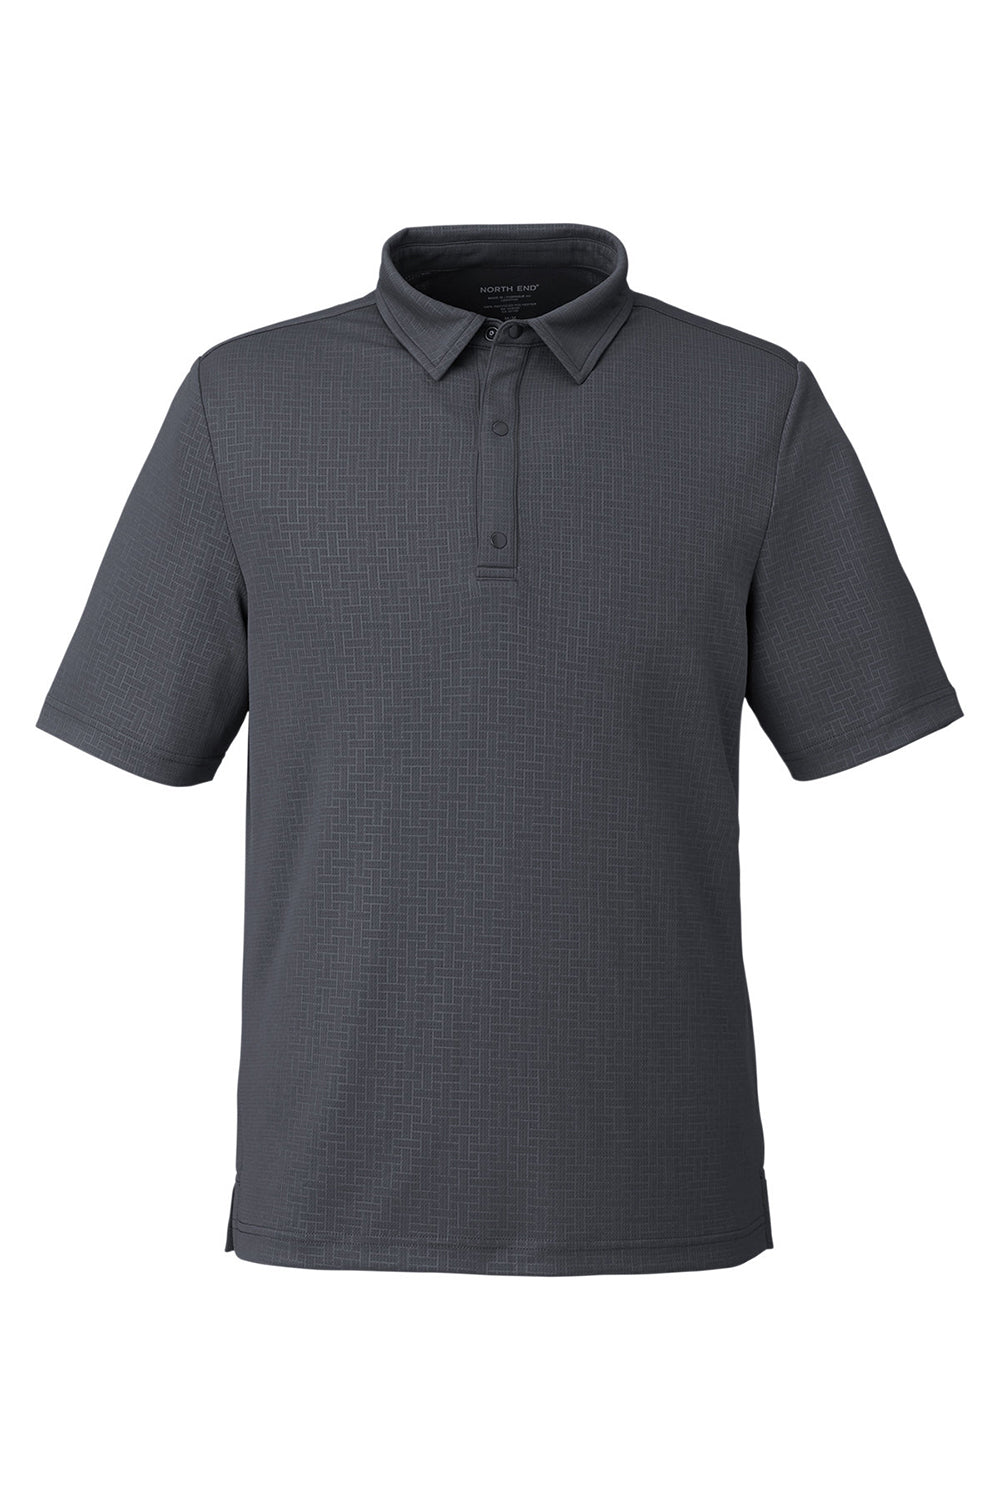 North End NE102 Mens Replay Recycled Short Sleeve Polo Shirt Carbon Grey Flat Front